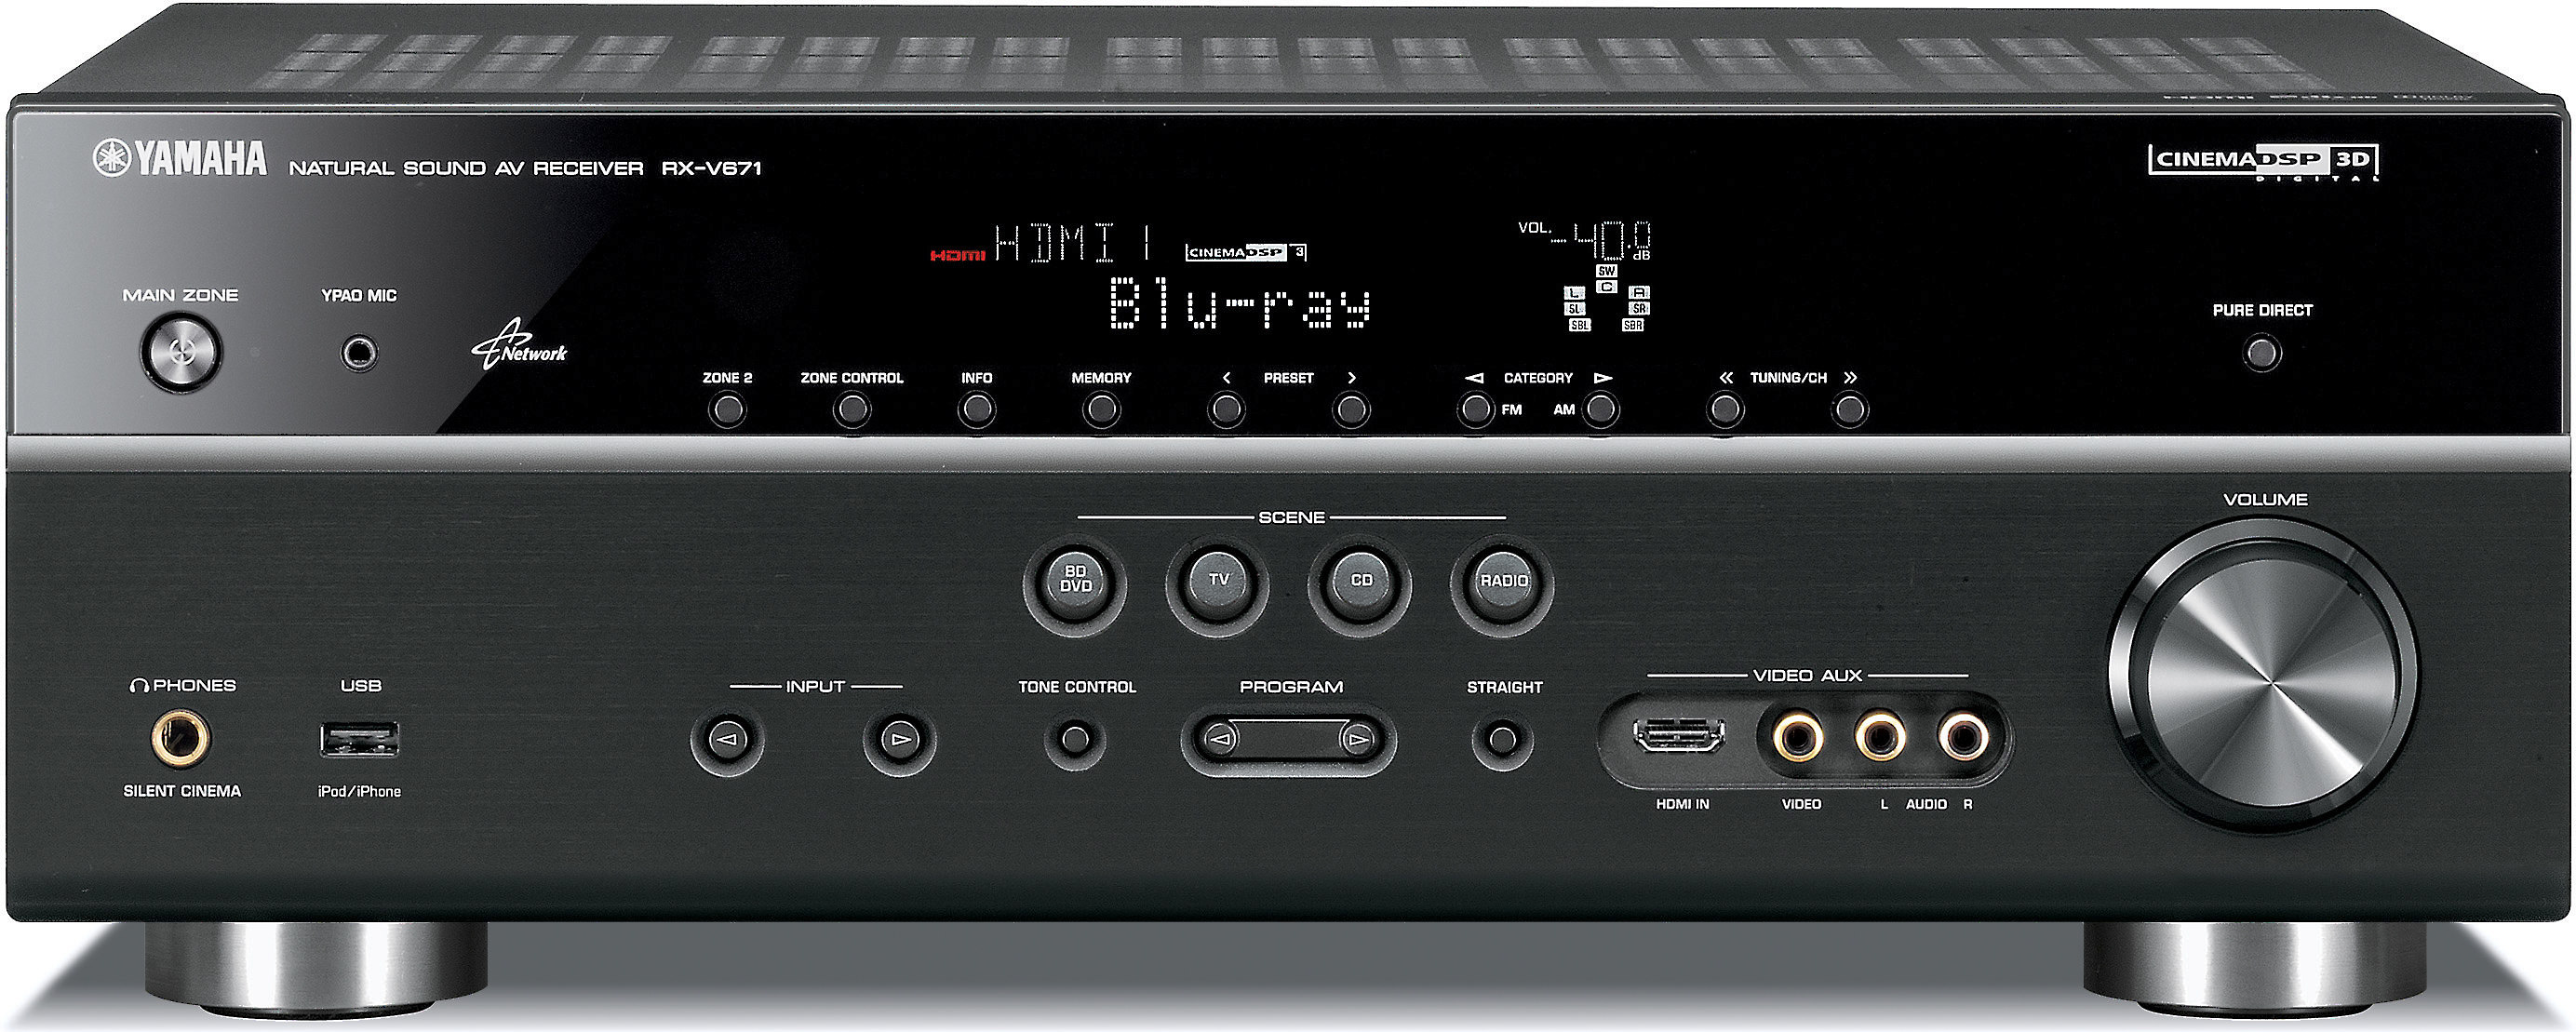 Yamaha Rx V671 Home Theater Receiver With 3d Ready Hdmi Switching Internet Ready At Crutchfield